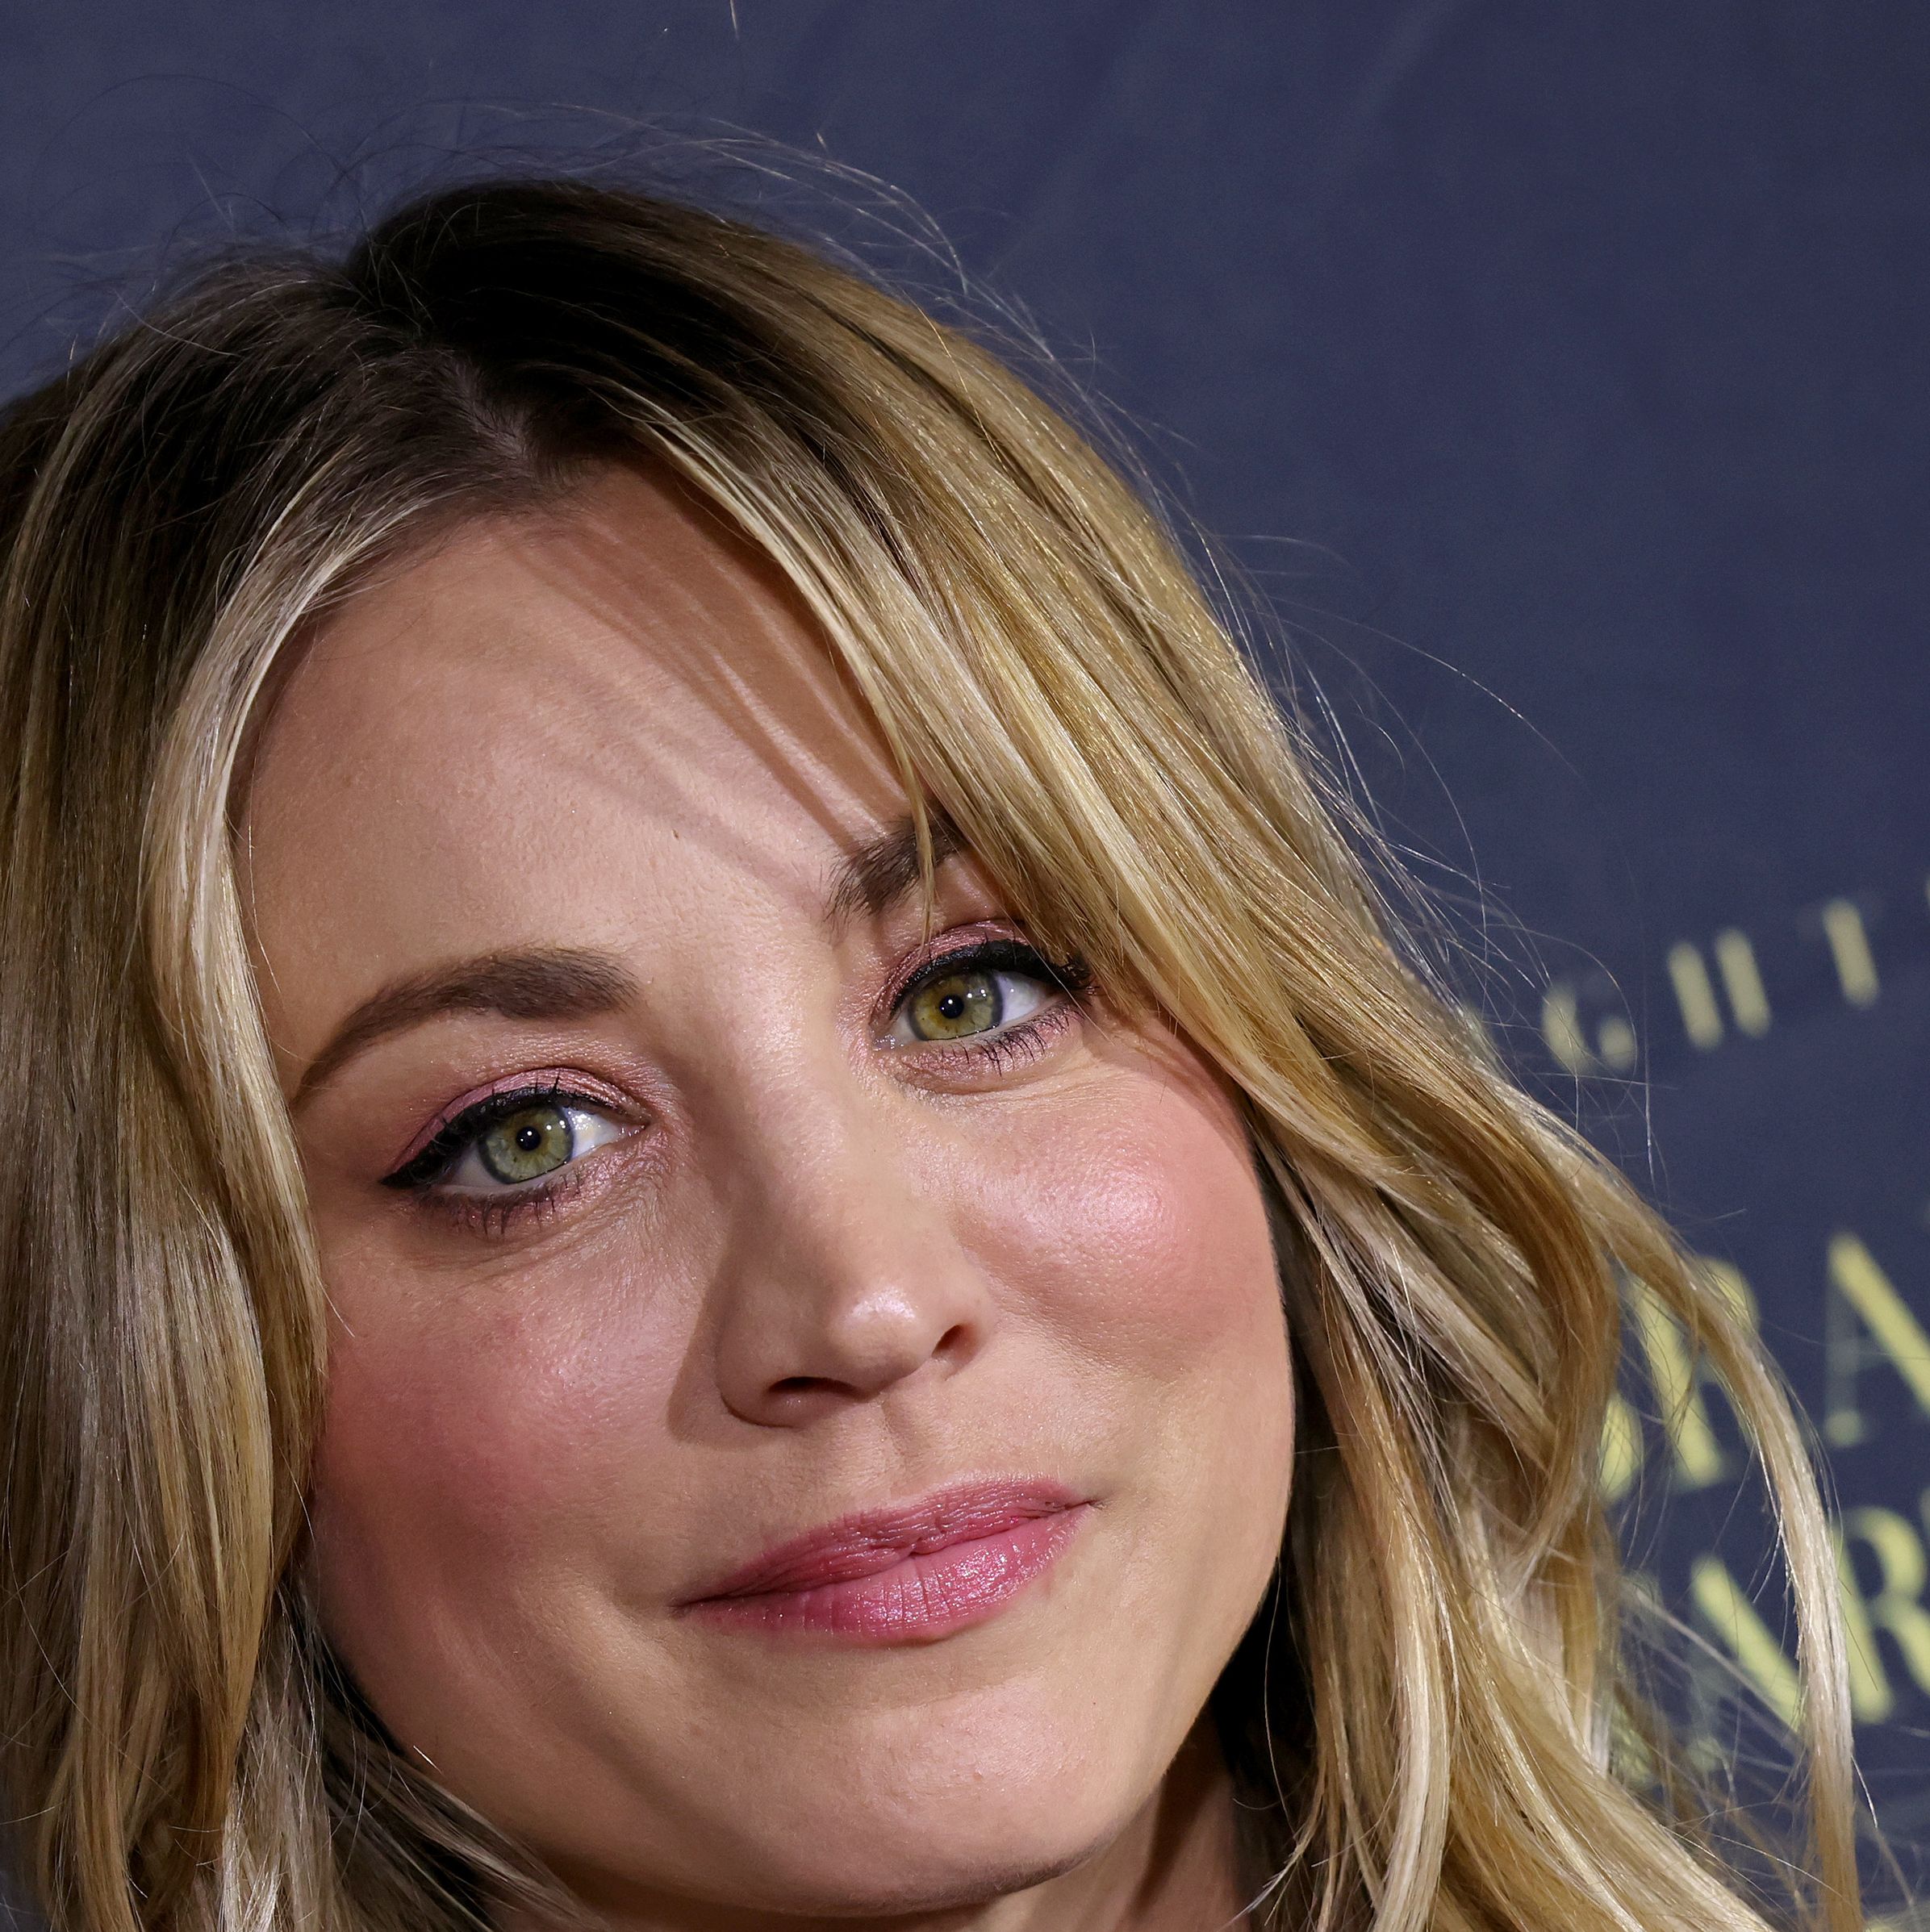 Celebrities Are Rushing to Support Kaley Cuoco After Seeing Her Heartbreaking IG